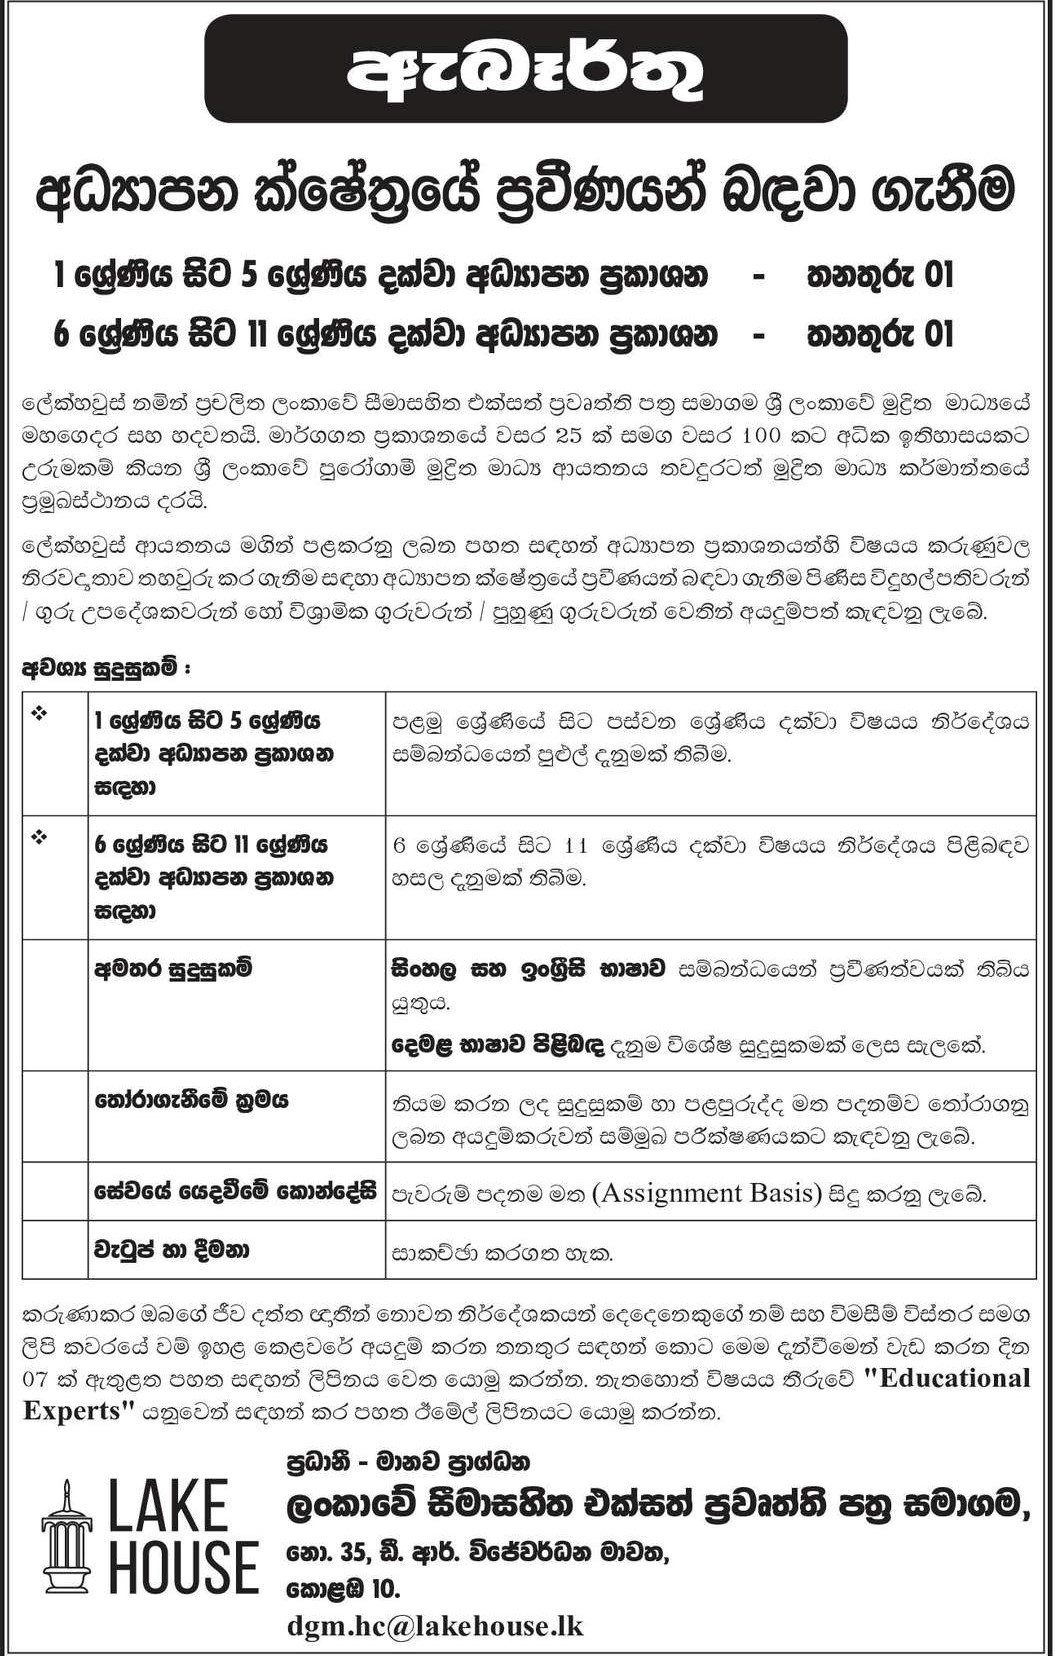 Recruitment of Educational Experts - The Associated Newspapers of Ceylon Sinhala